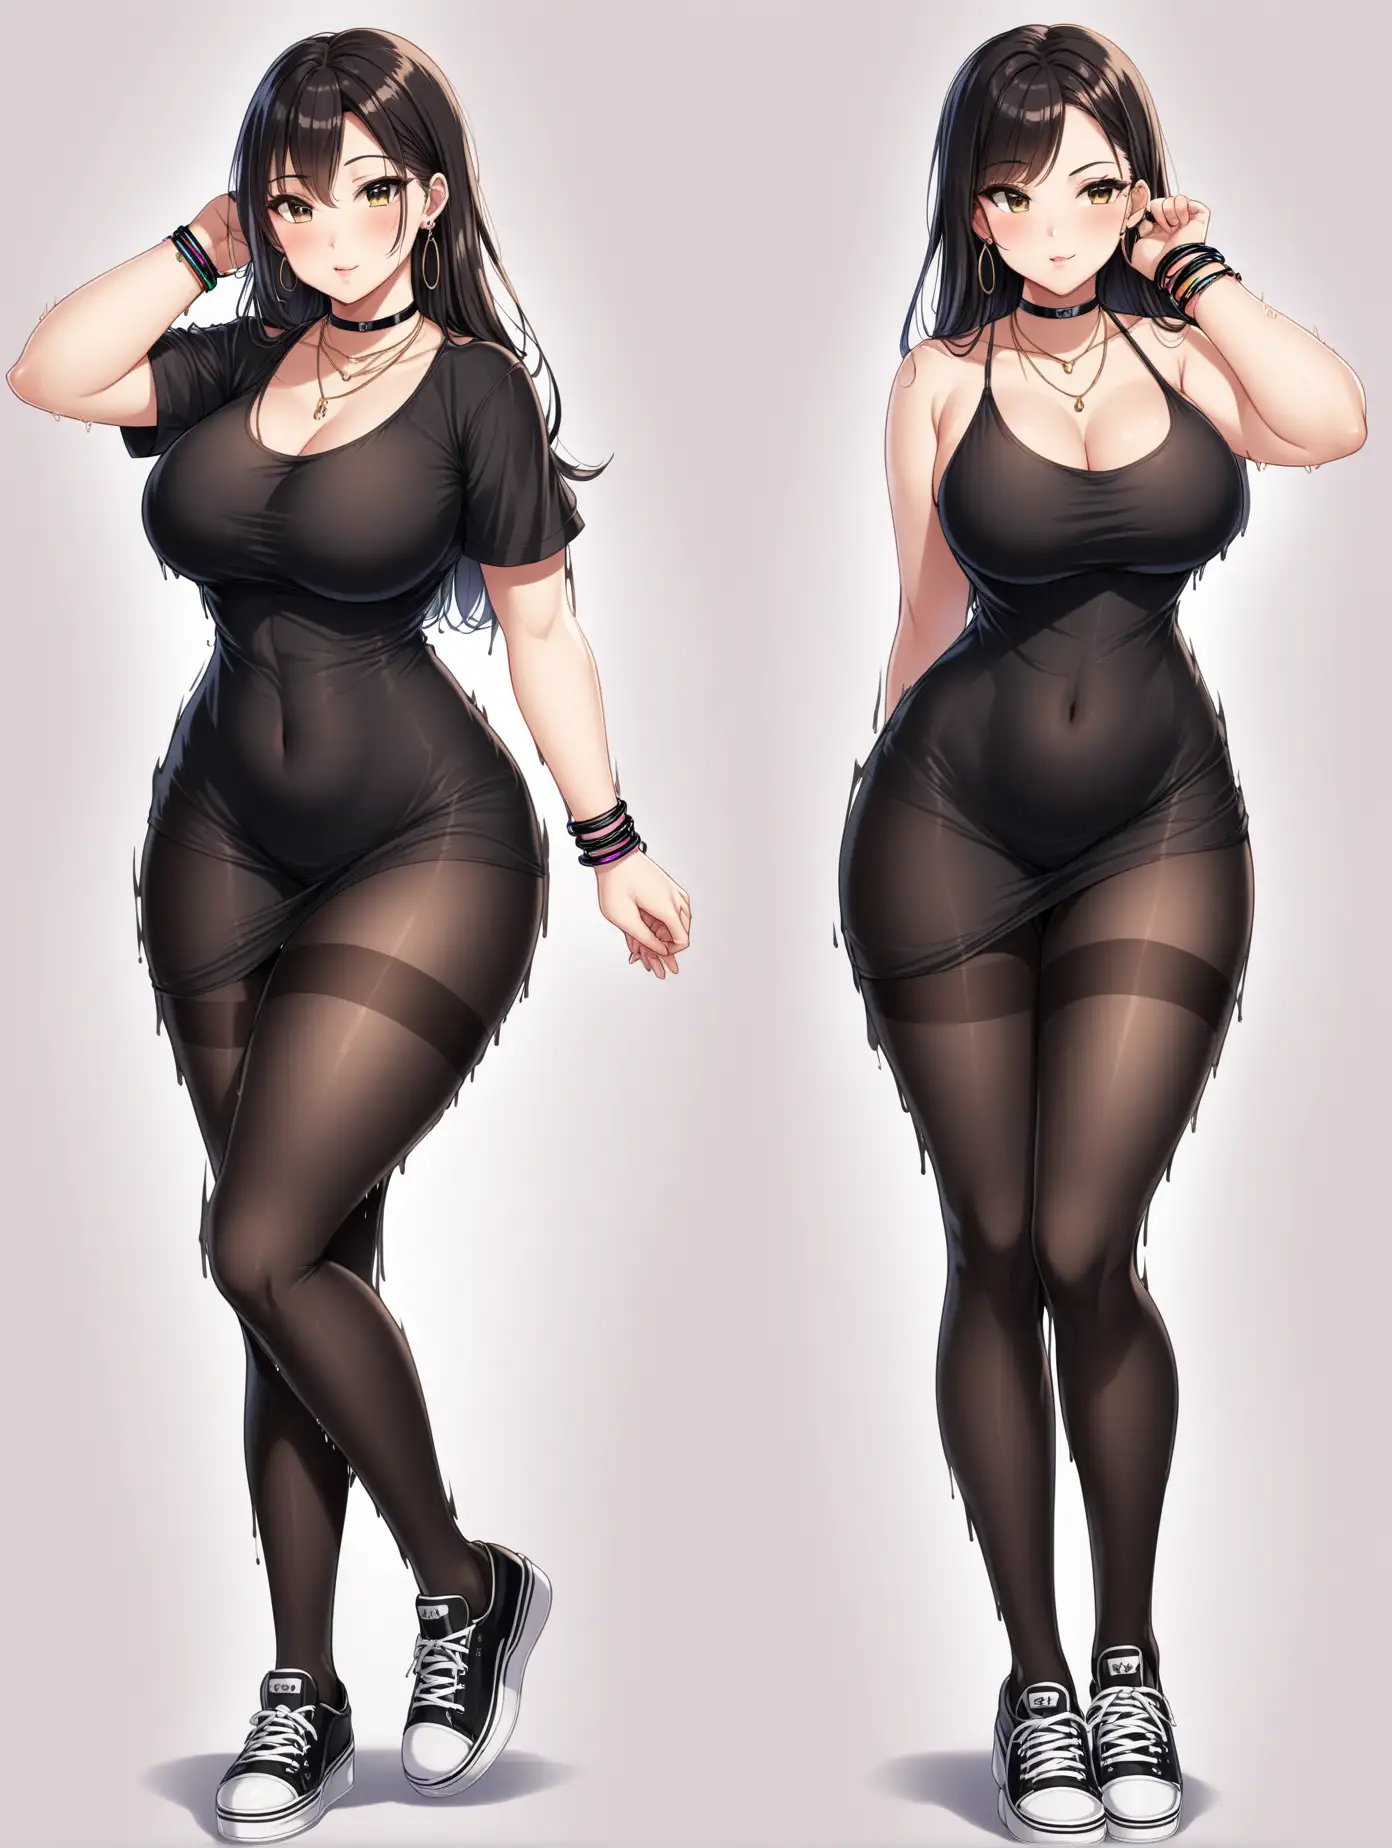 Sensual picture of a hot anime girl, age 25, curvy, height: tall, big ass, black pantyhose body stockings, long shirt dress, wearing Slipons sneakers, choker, necklaces, big earrings, wristbands, 2 poses